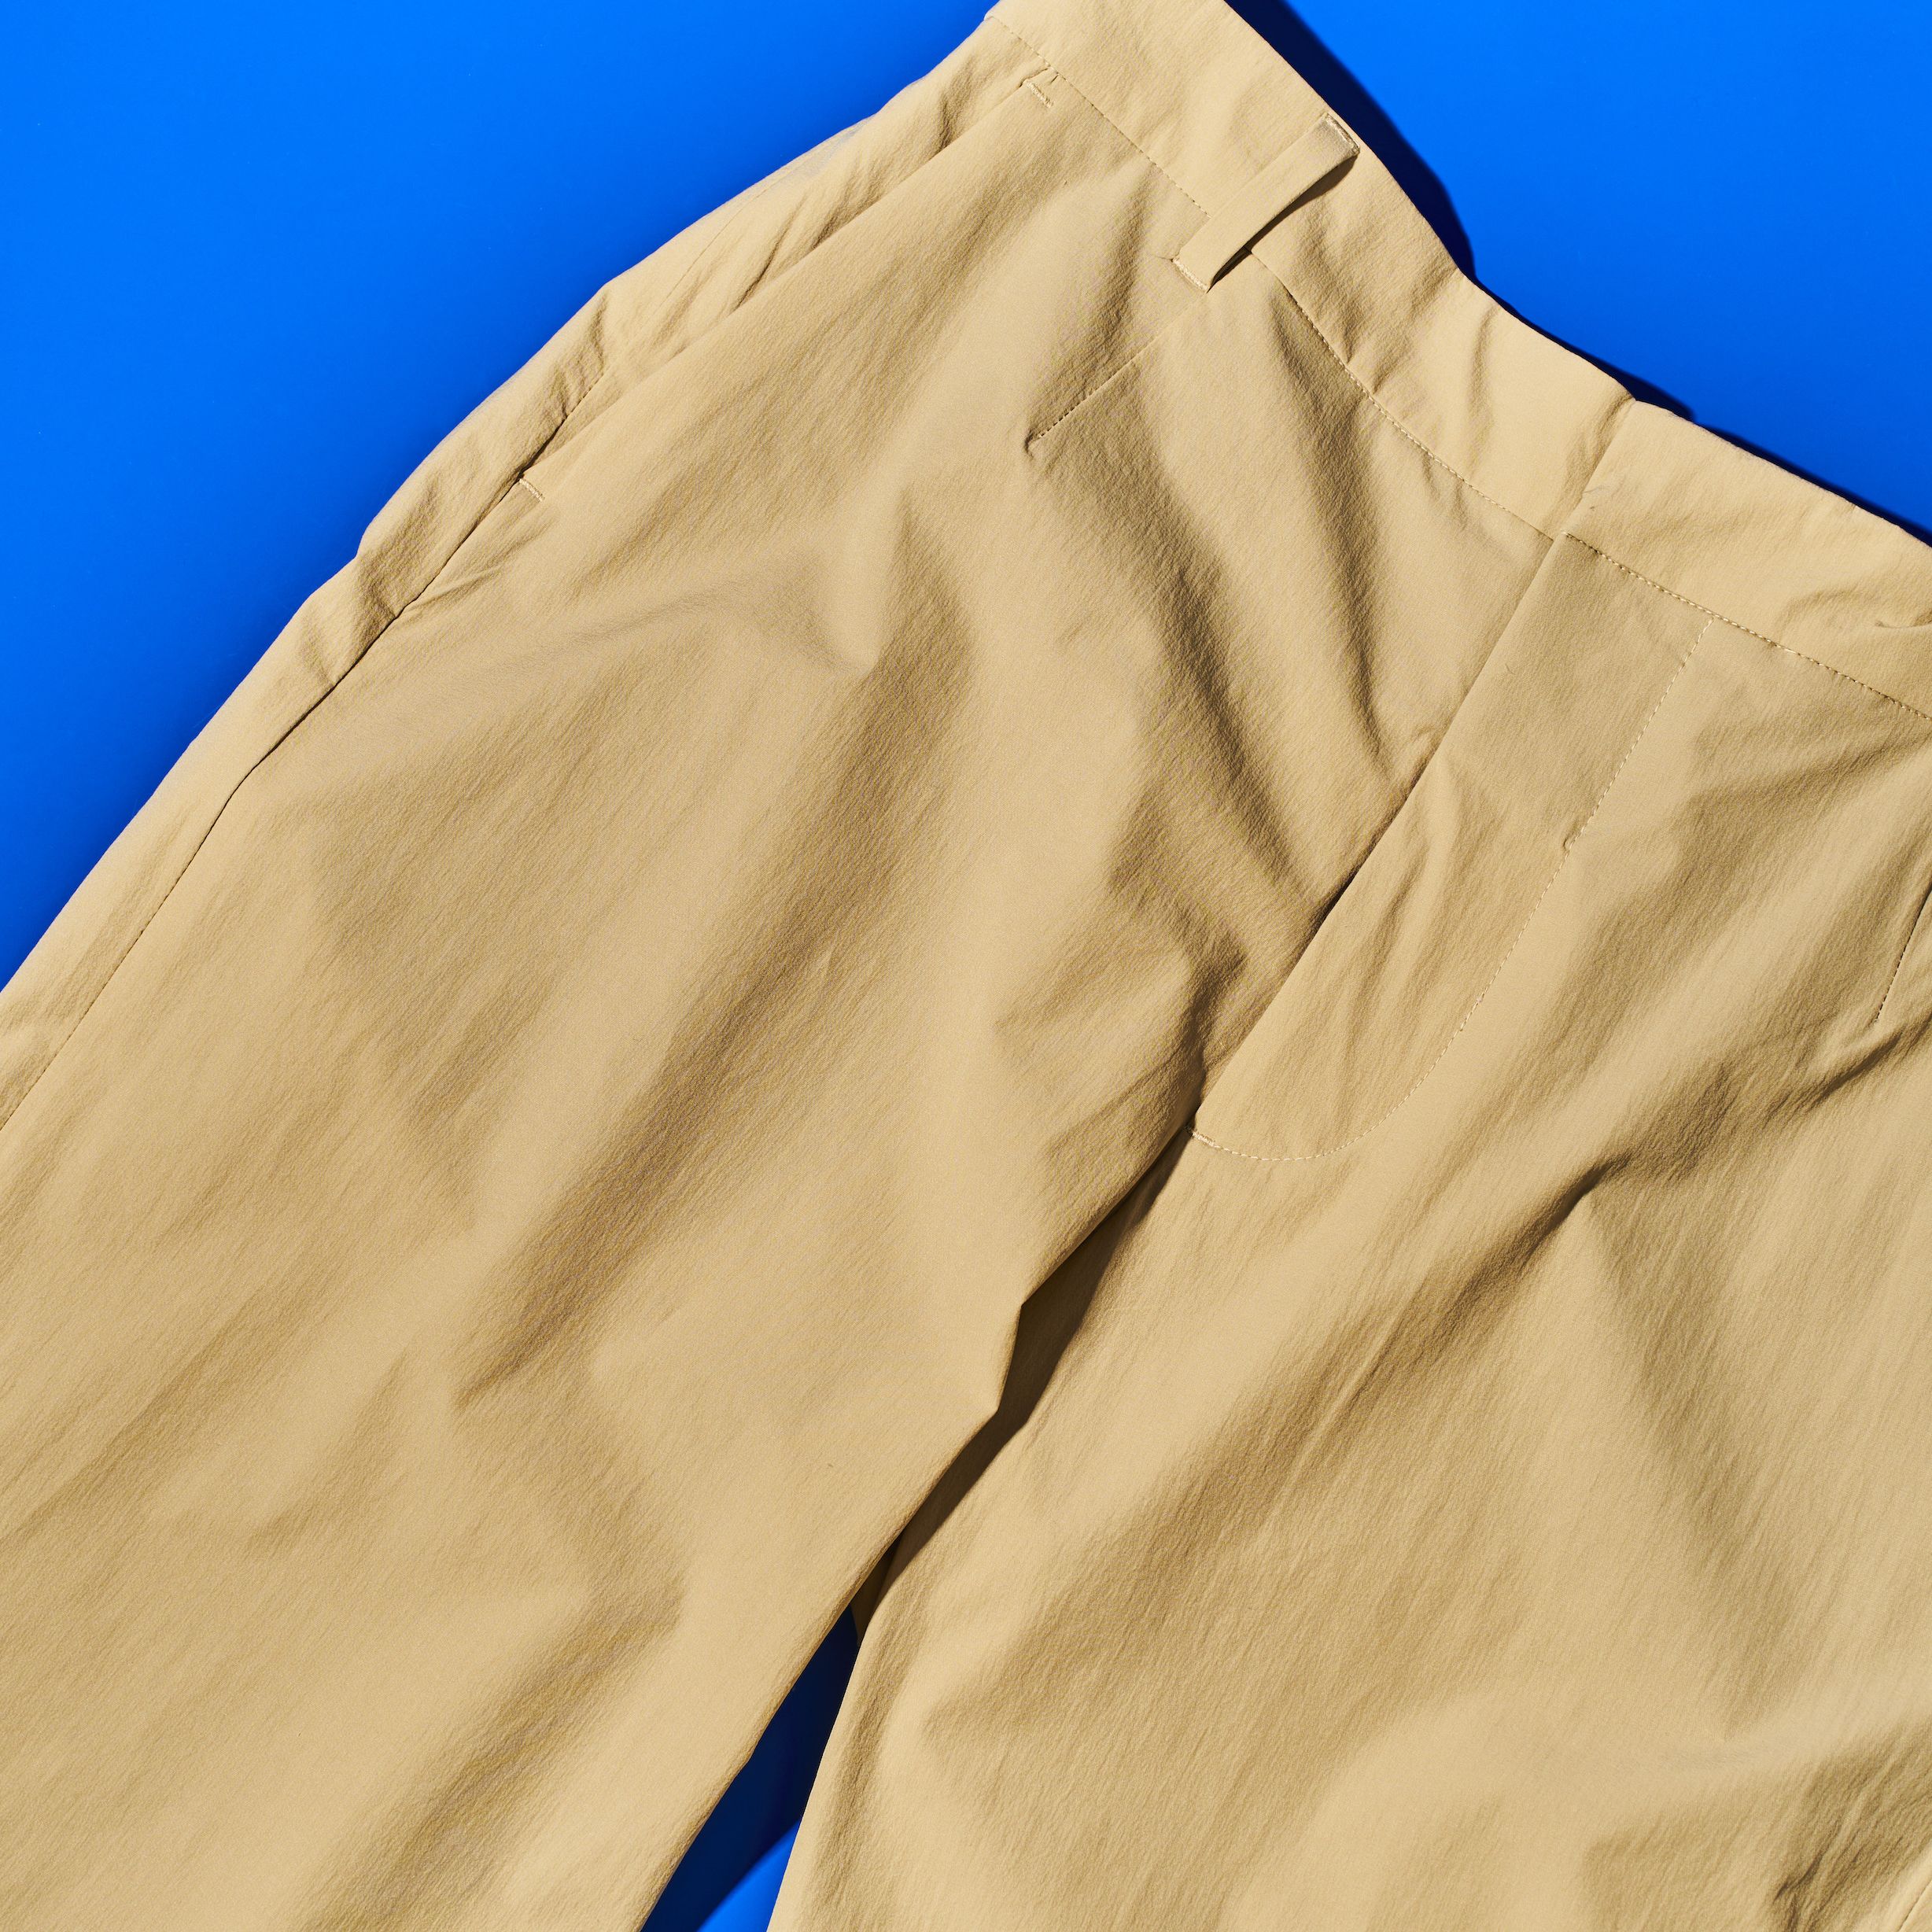 These Are the Hands-Down Best Travel Pants Out There